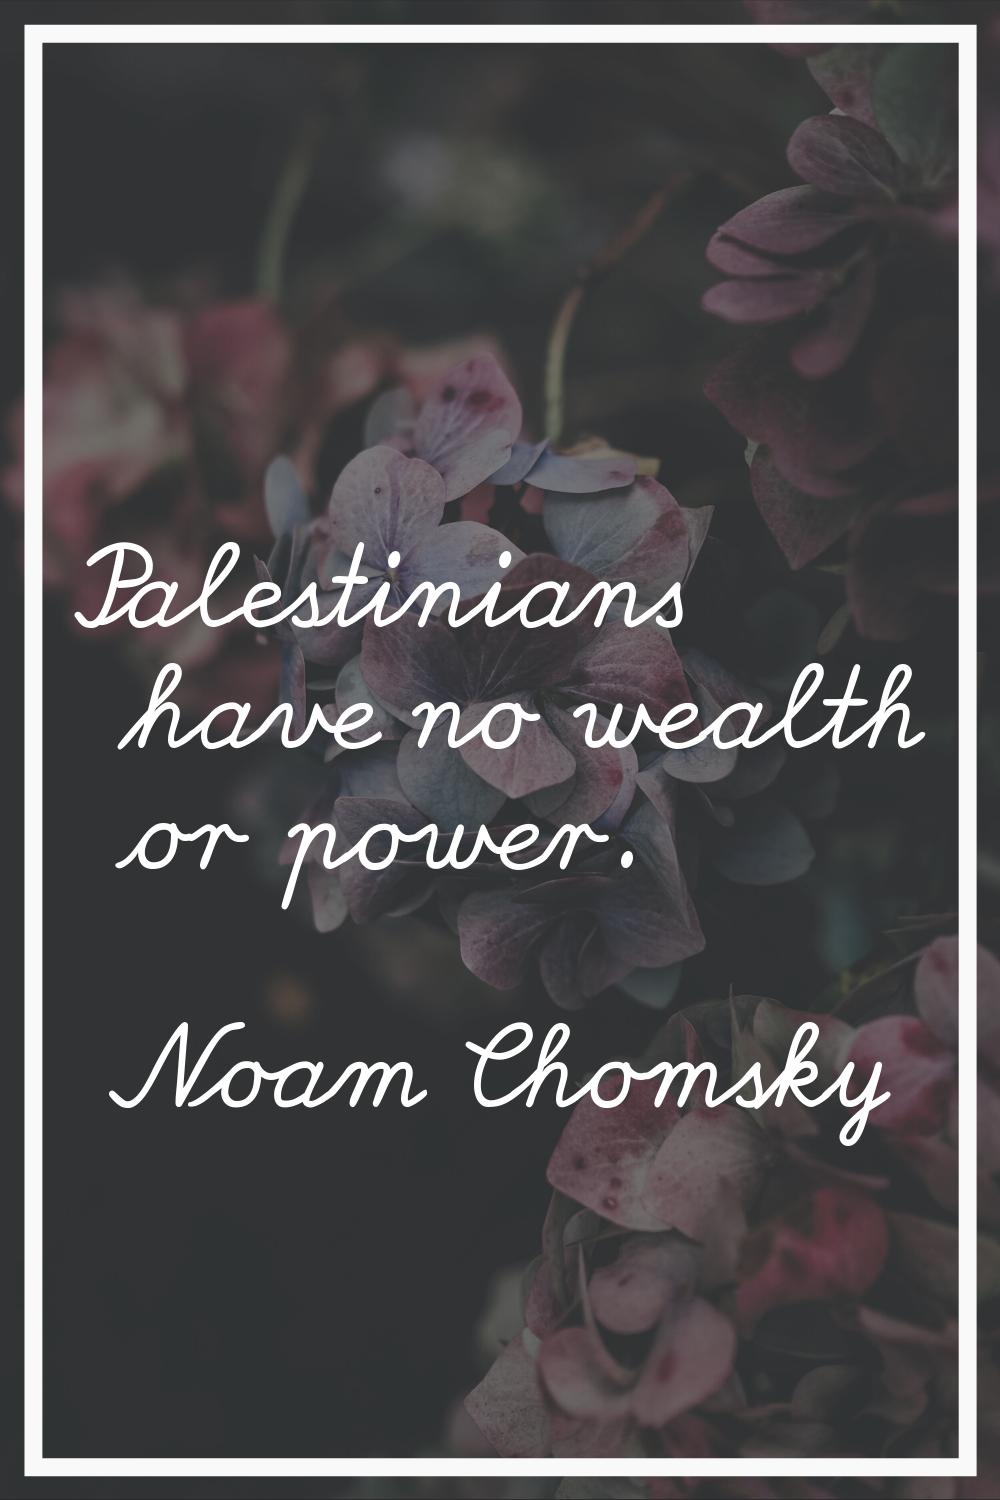 Palestinians have no wealth or power.